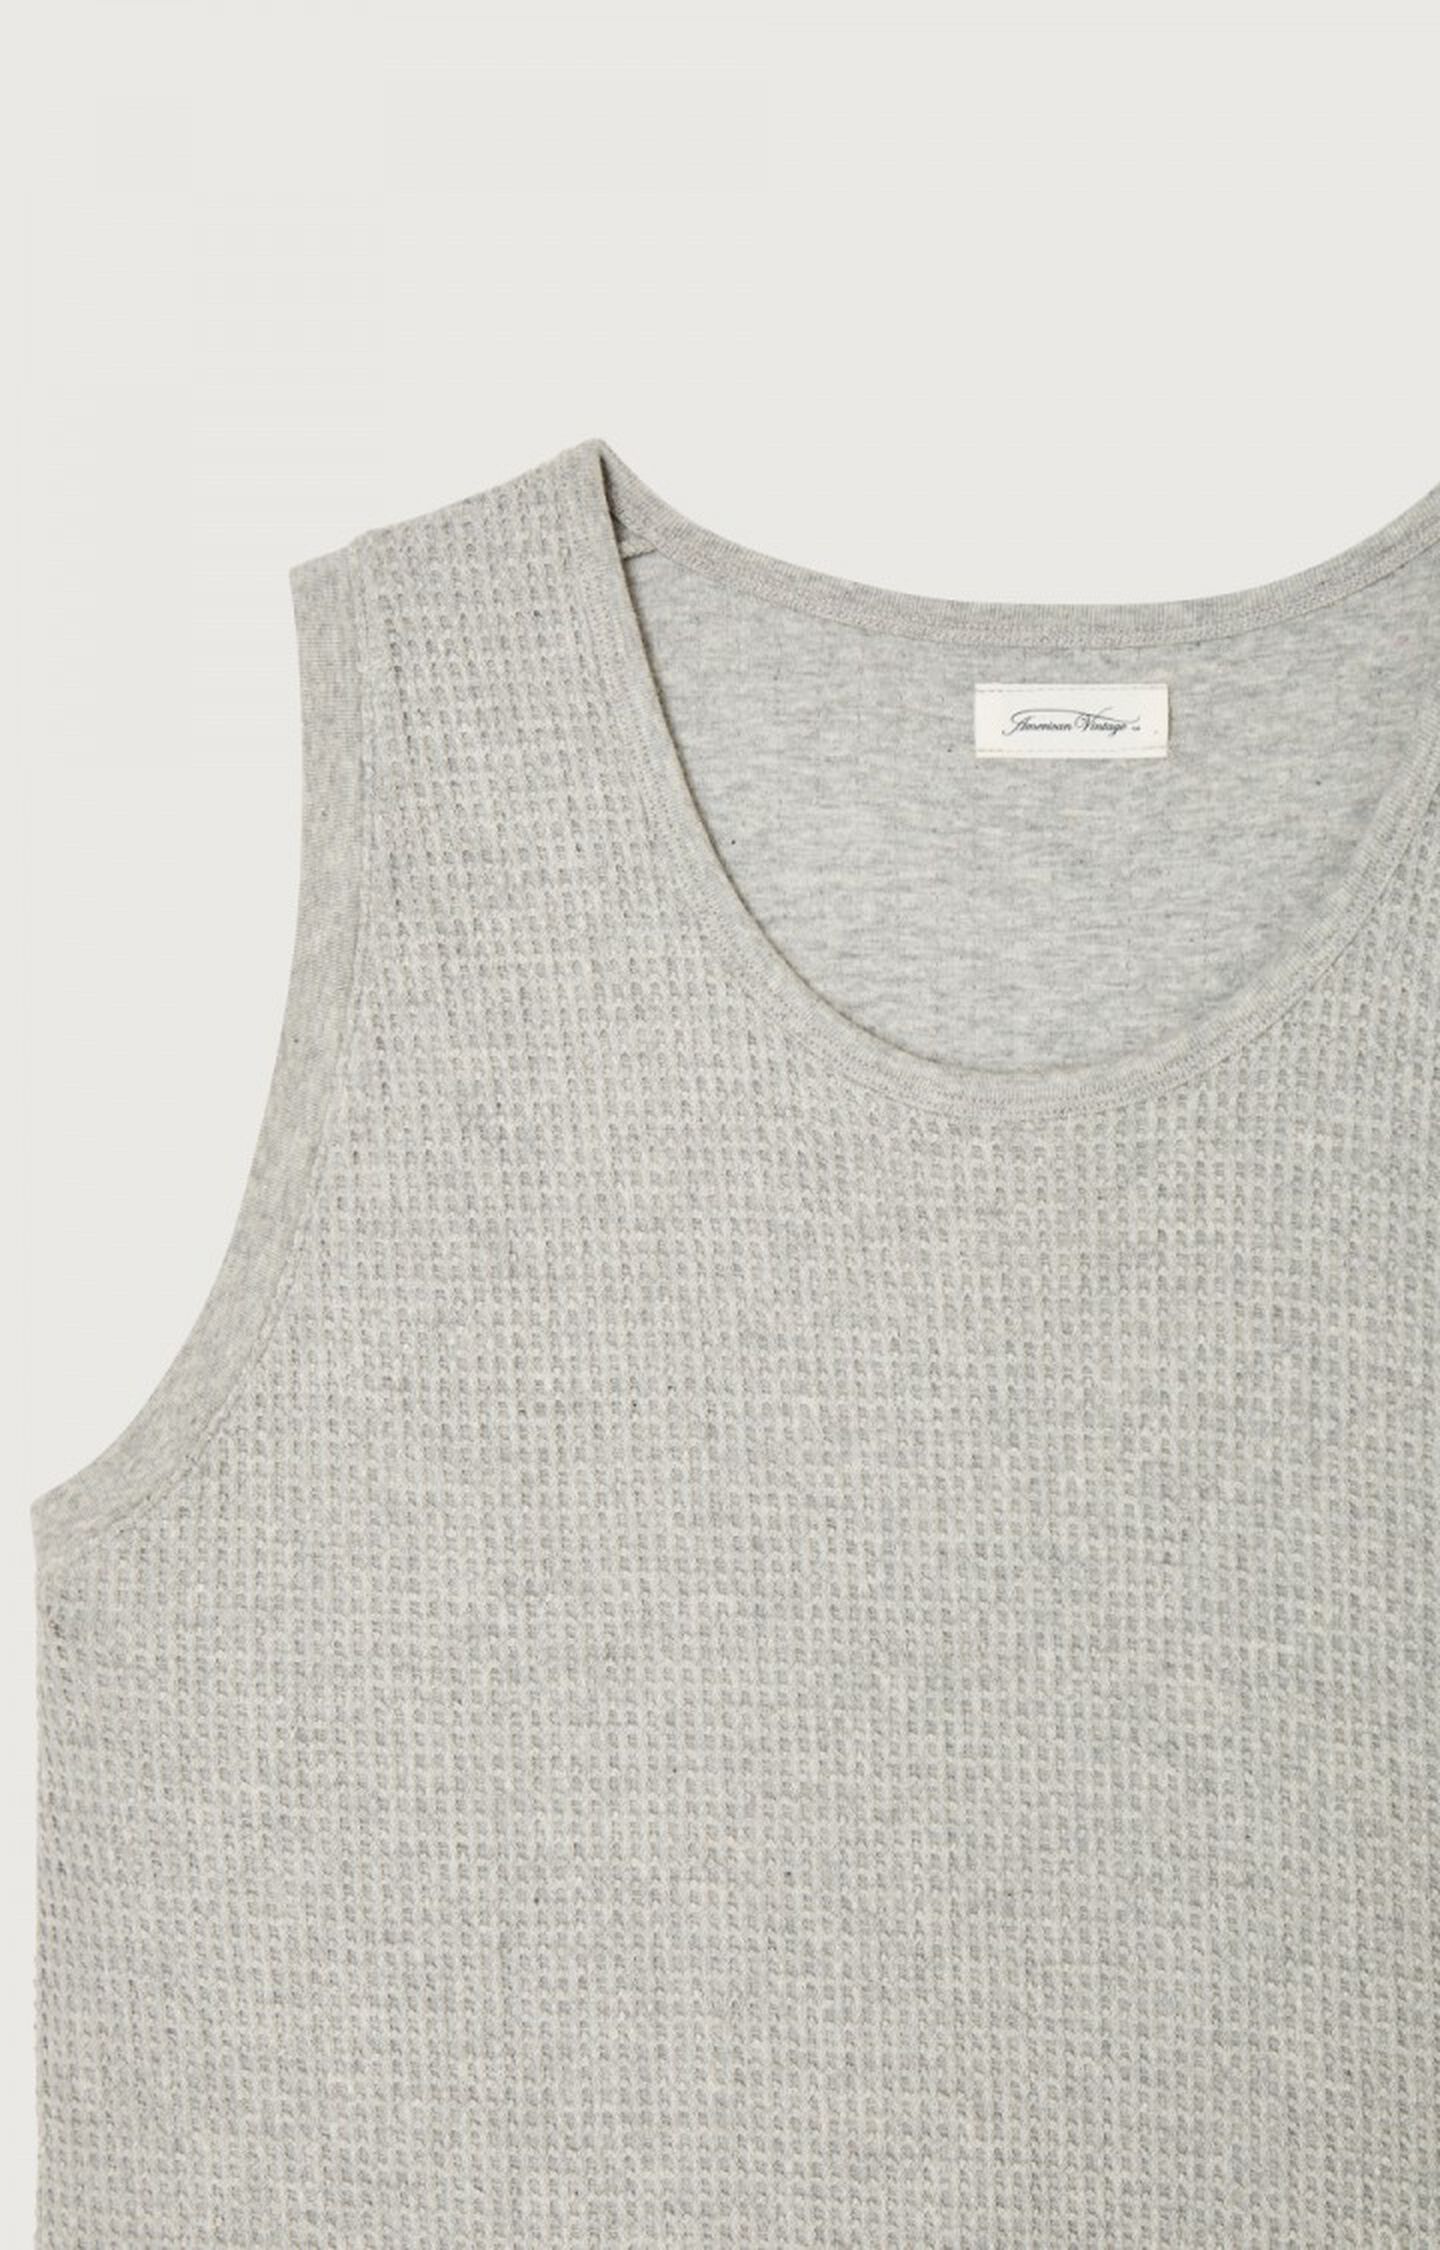 Go Softwear Pacific Classic Tank Top Silver Grey